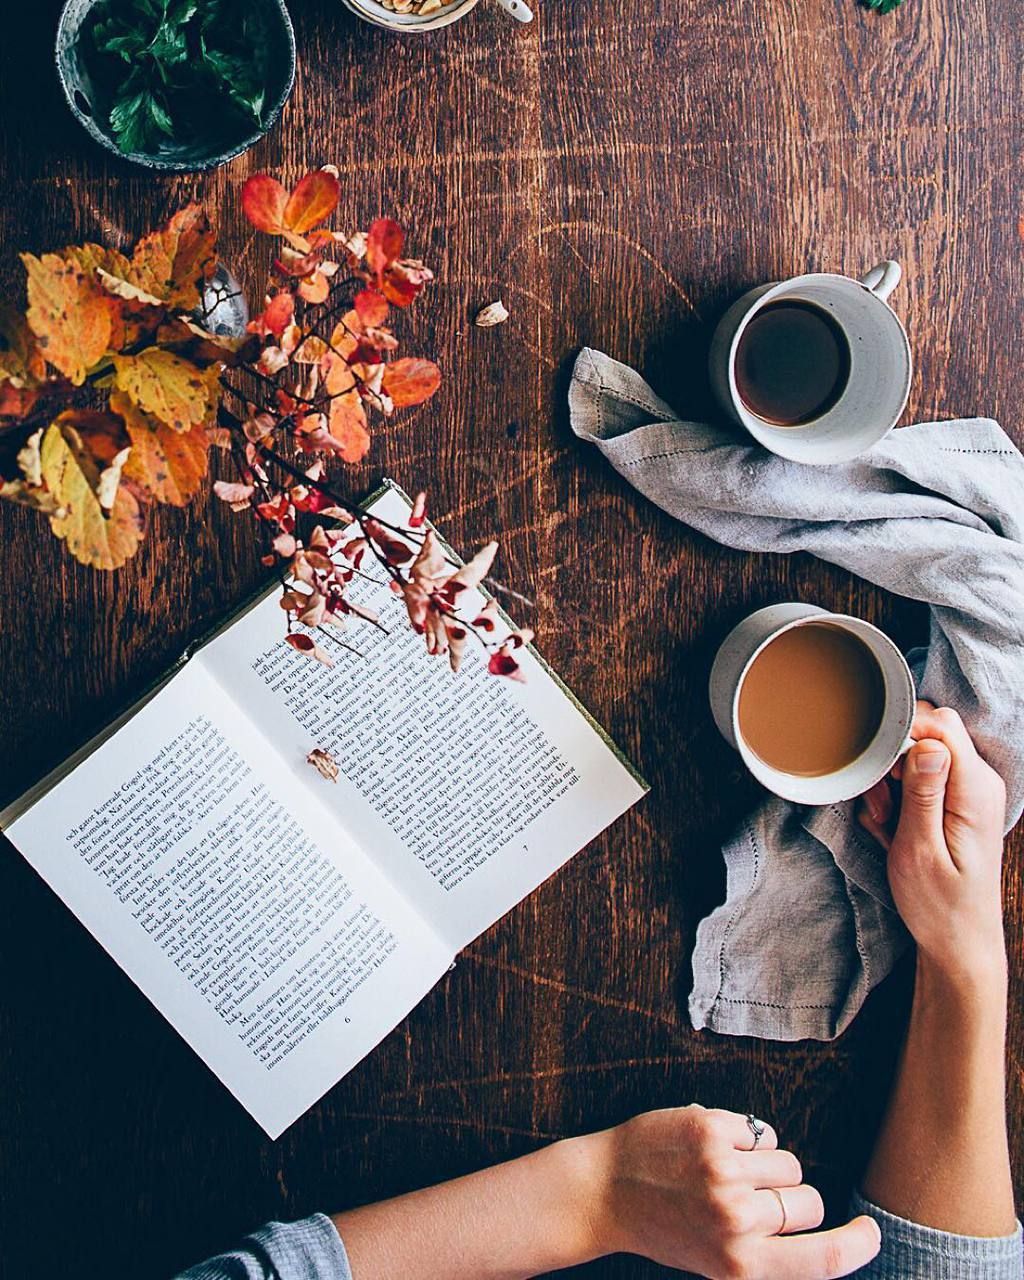 Silly Luv. Coffee And Books, Autumn Aesthetic, Autumn Cozy